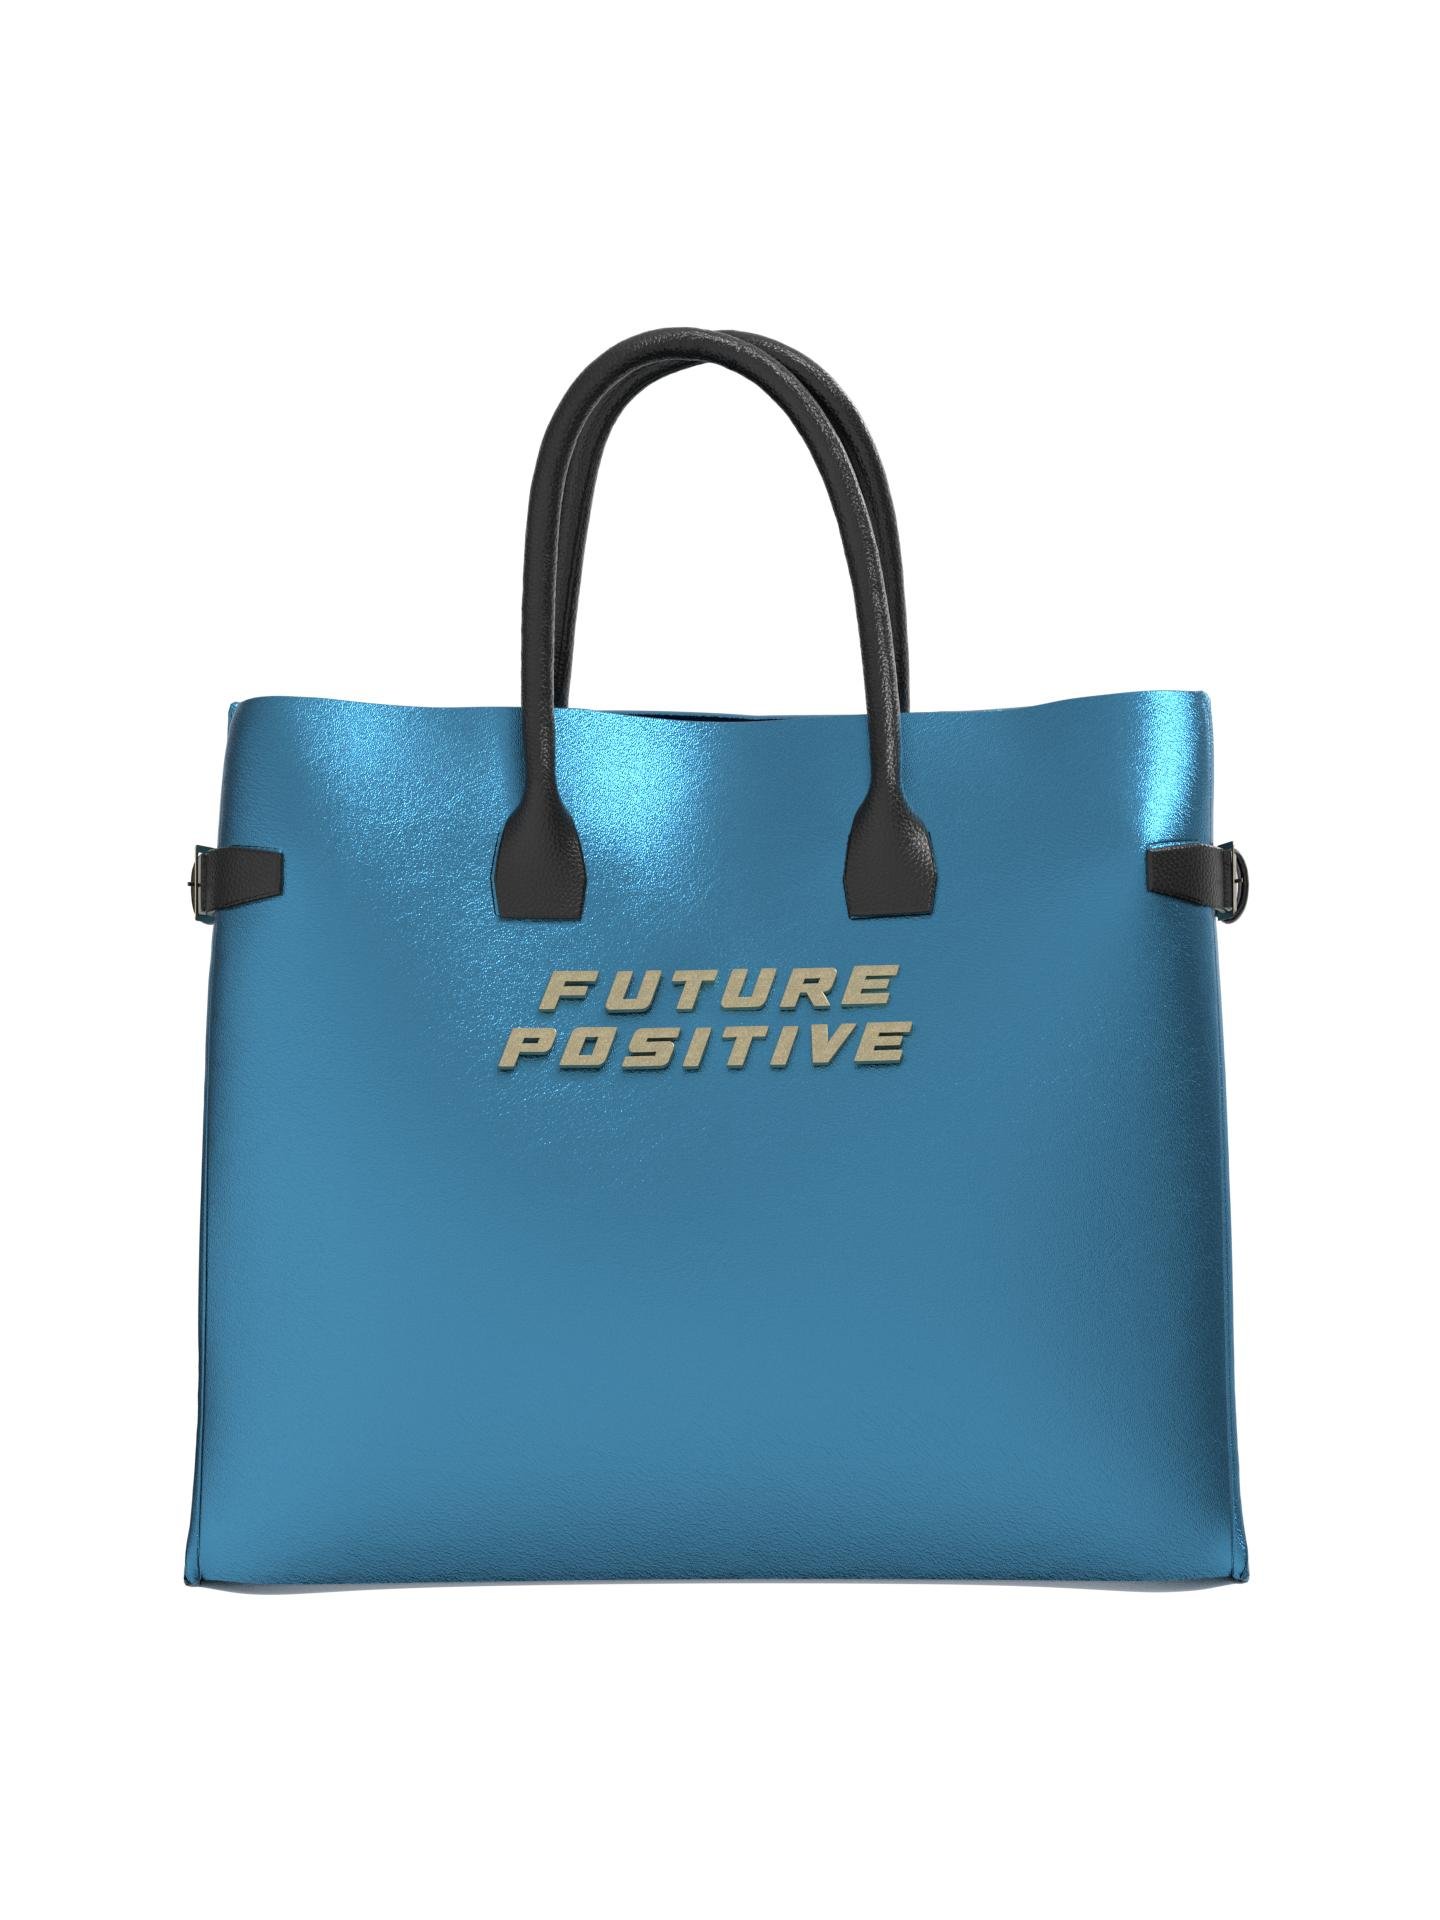 TRAVELER BAG by FUTURE POSITIVE